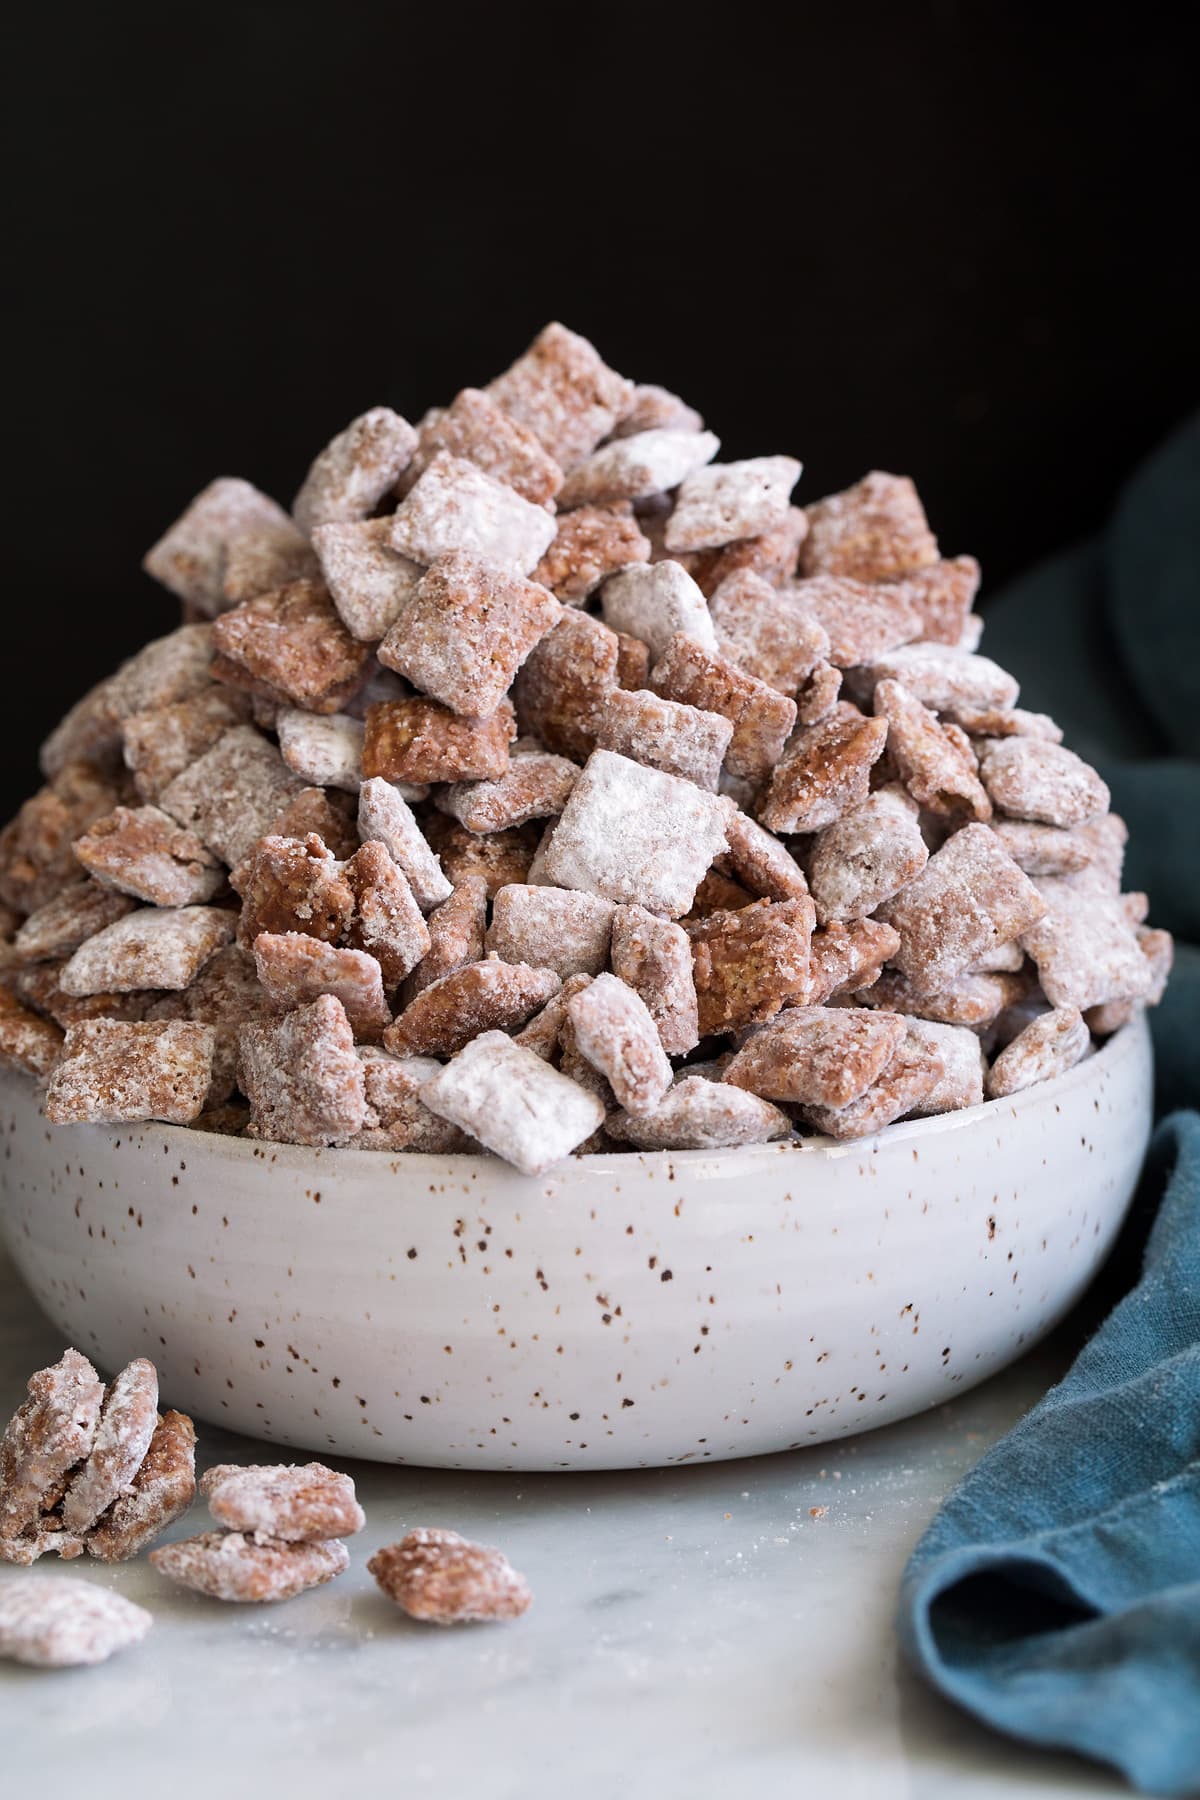 Puppy Chow Recipe Muddy Buddies Cooking Classy,Portable Gas Grills Amazon